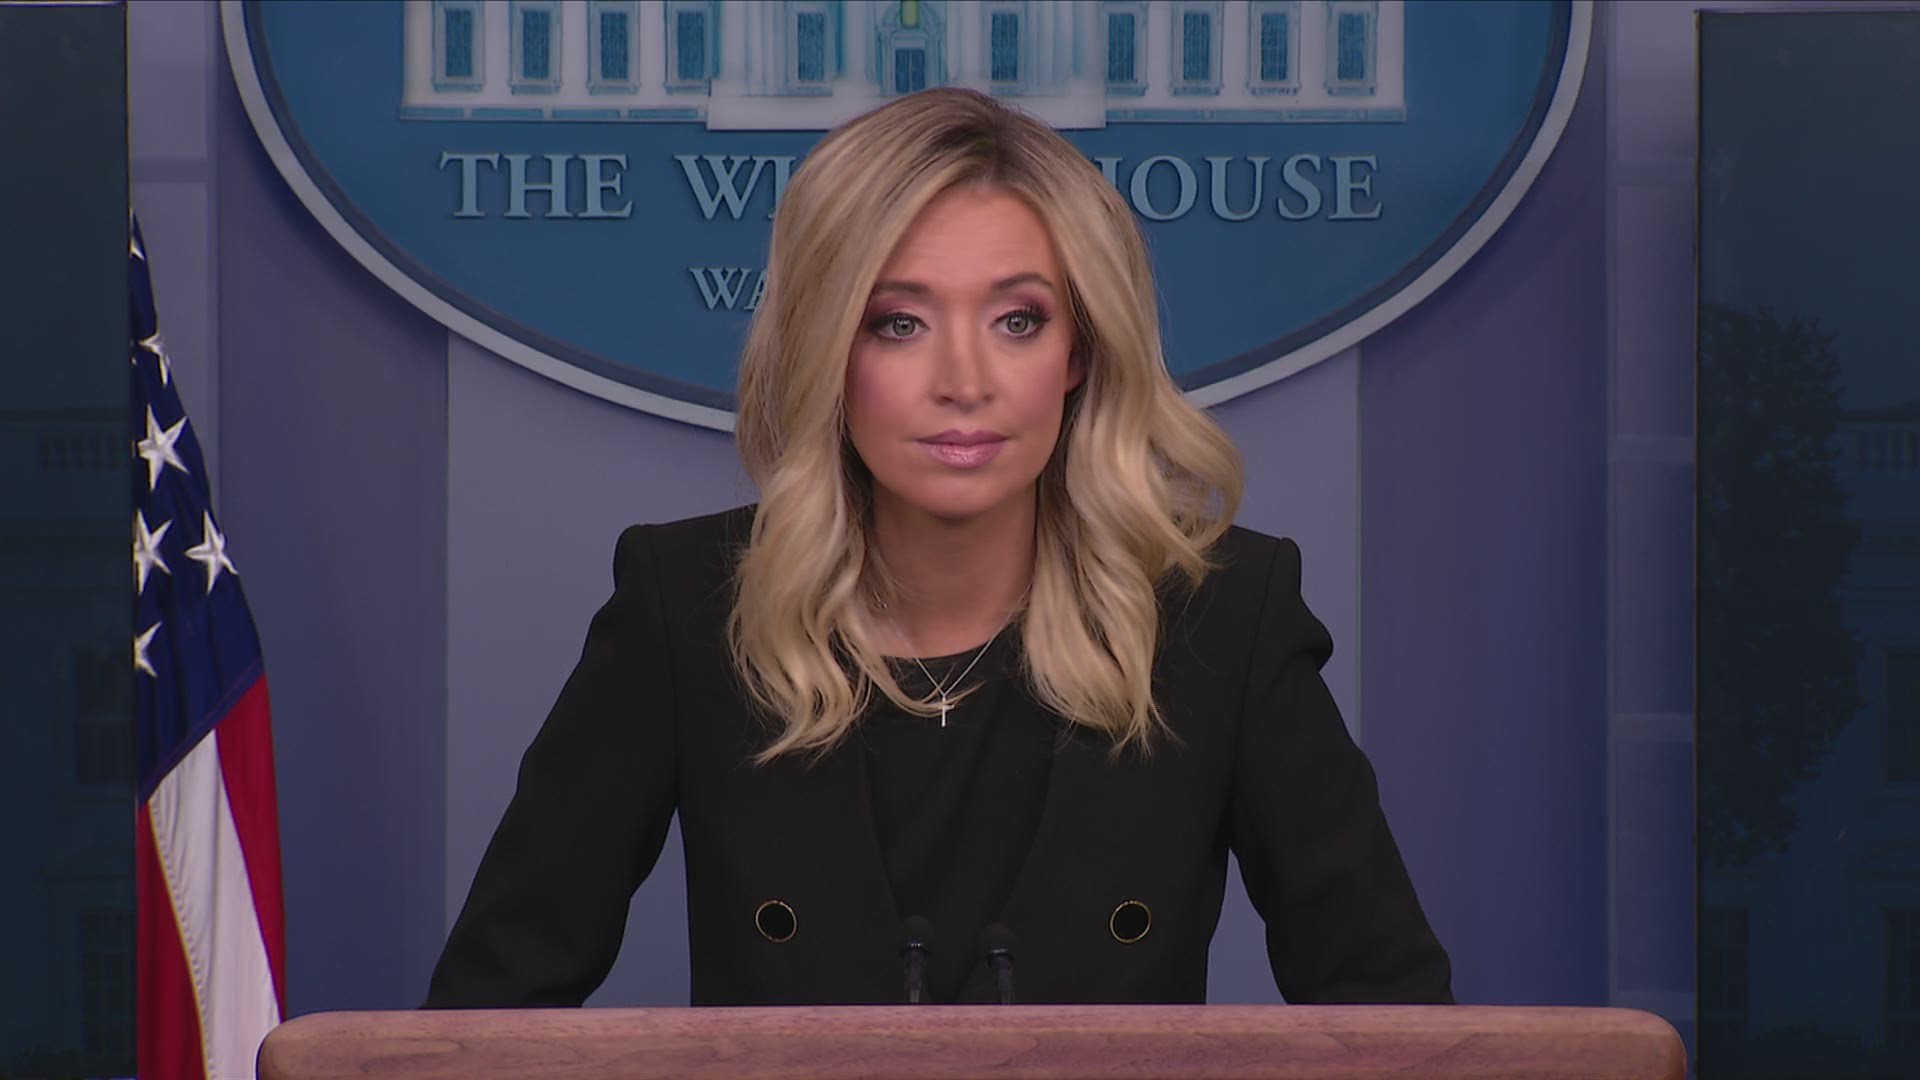 McEnany added that she plans to continue press briefings.